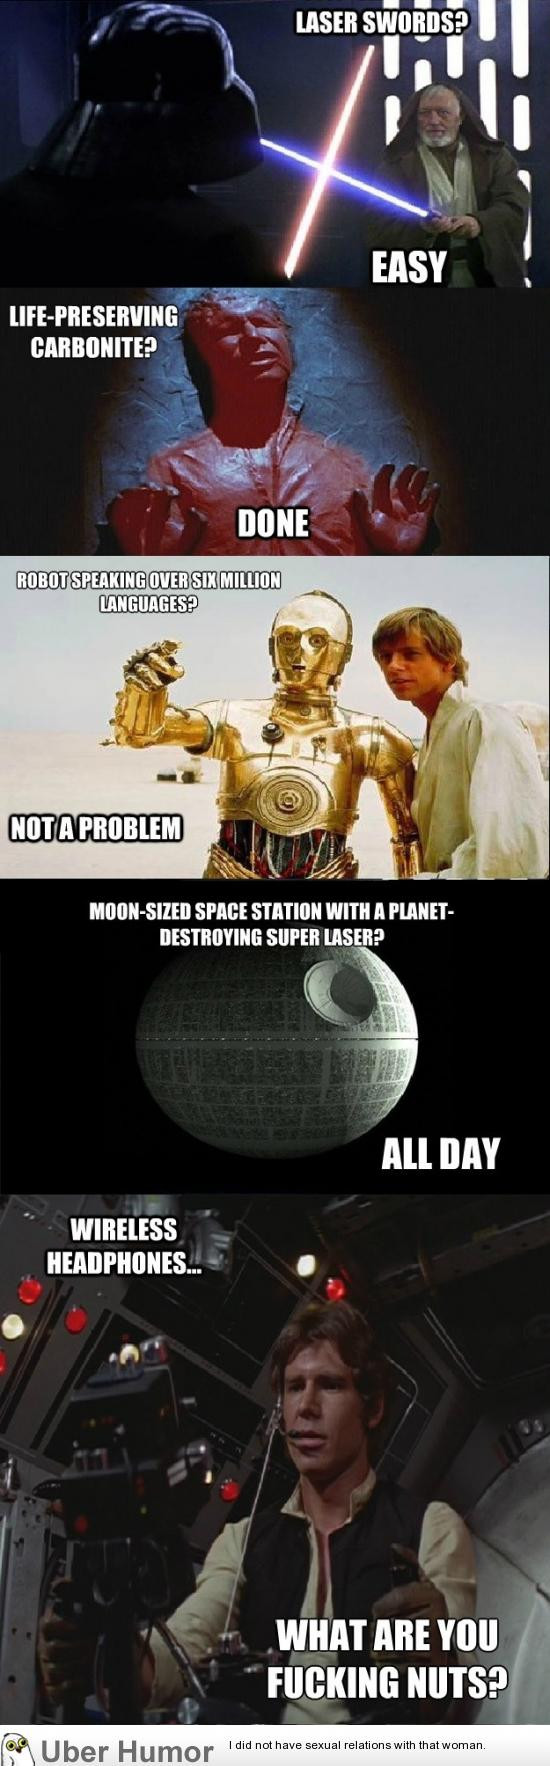 Funny Star Wars Quotes
 The logic of Star Wars